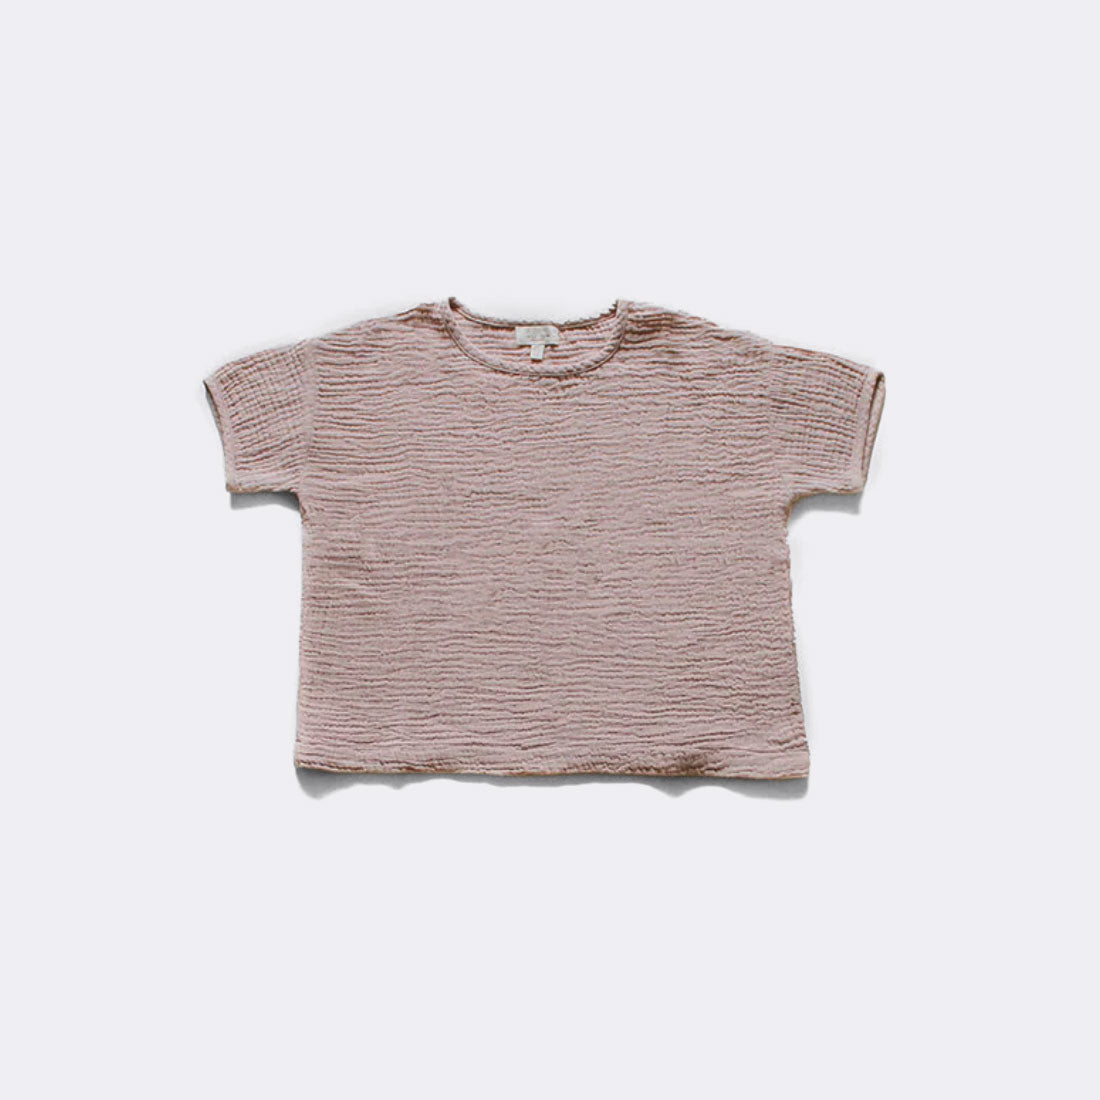 The Organic Muslin S/S Top - Antique Rose